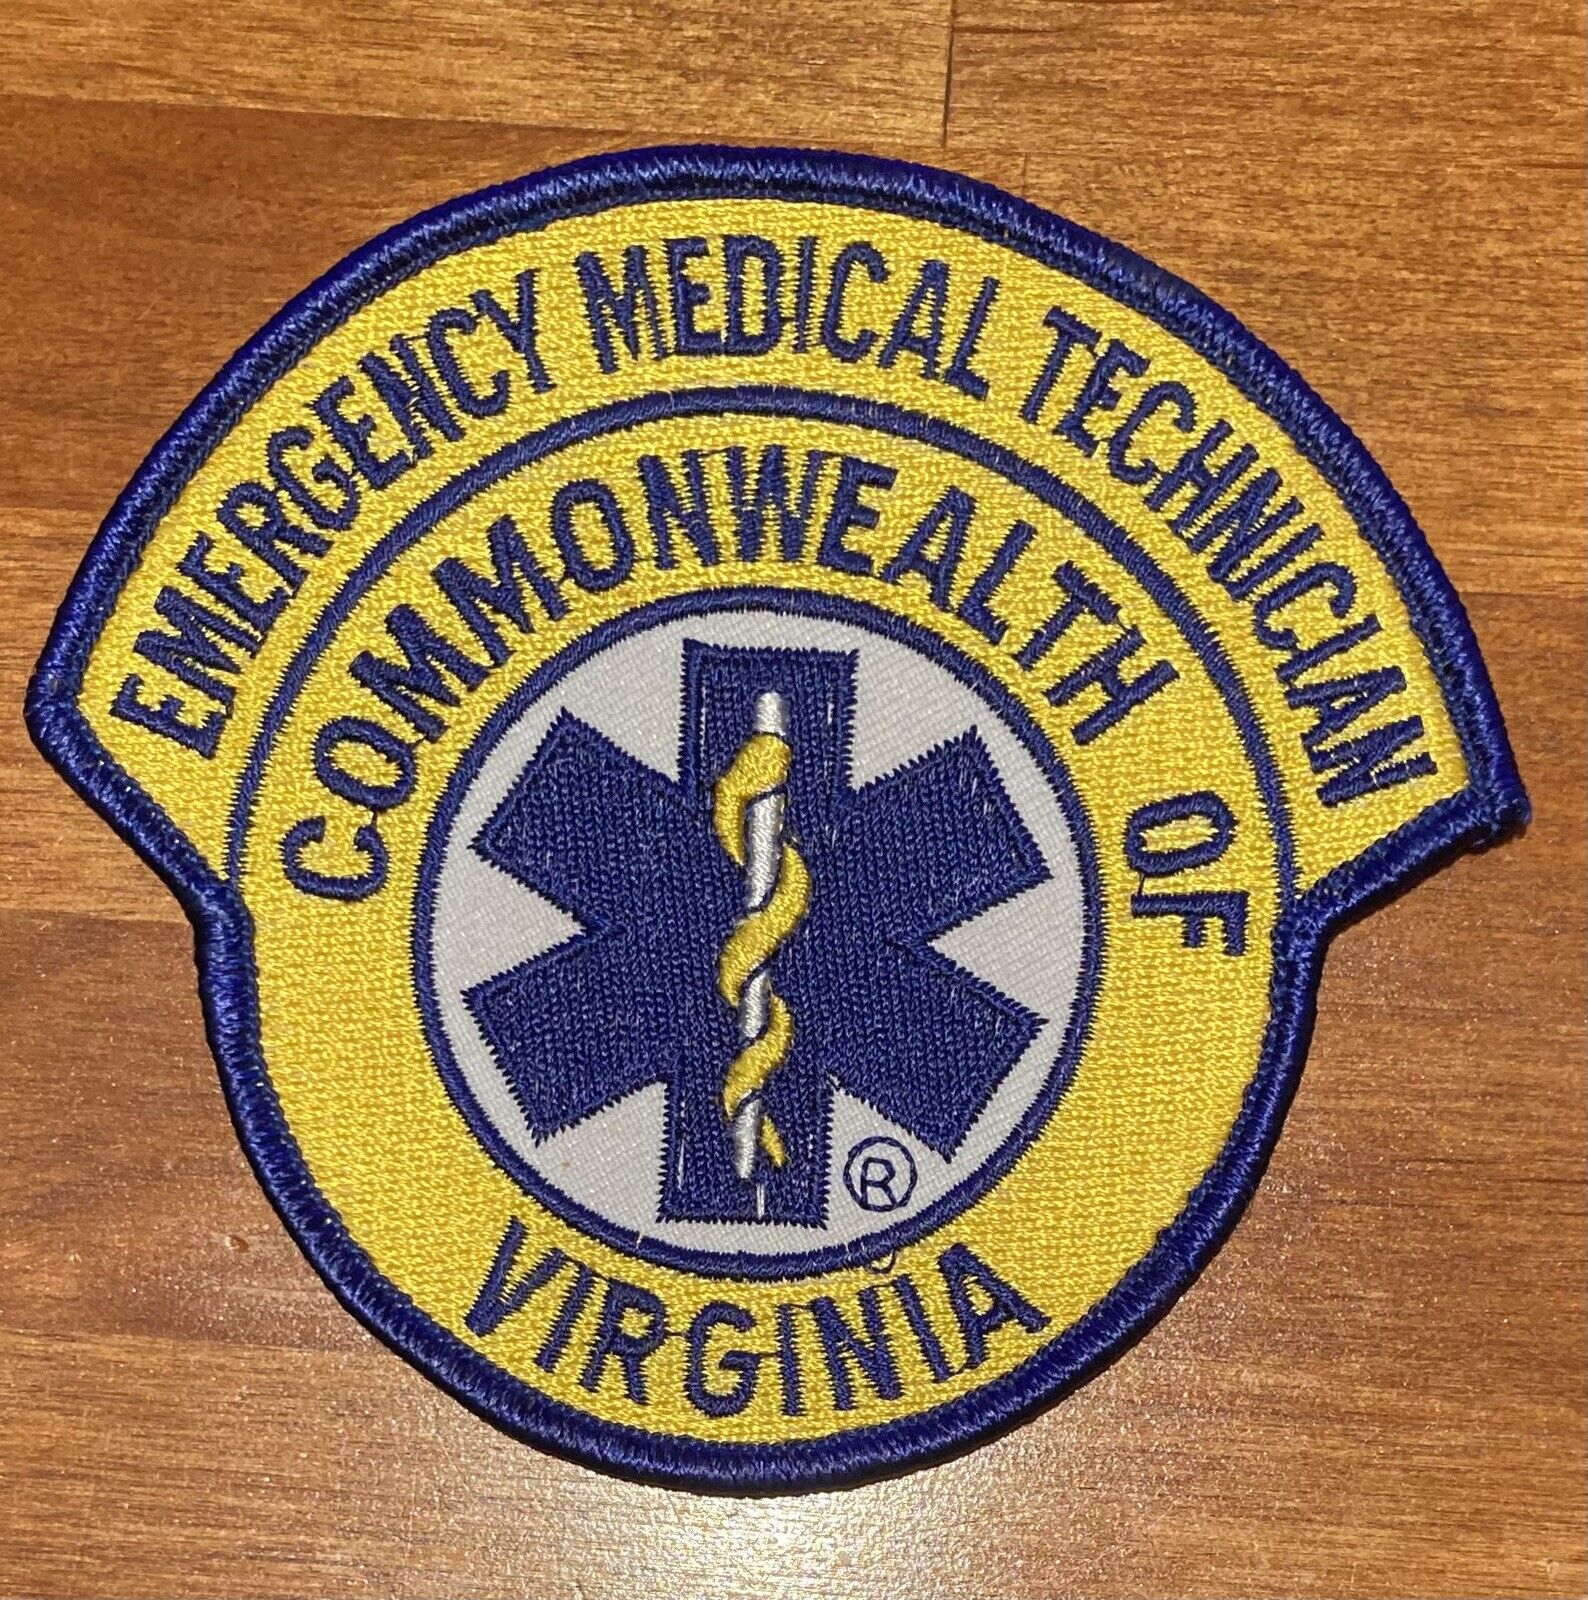 New Emergency Medical Technician Commonwealth of Virginia EMT Patch Blue Yellow